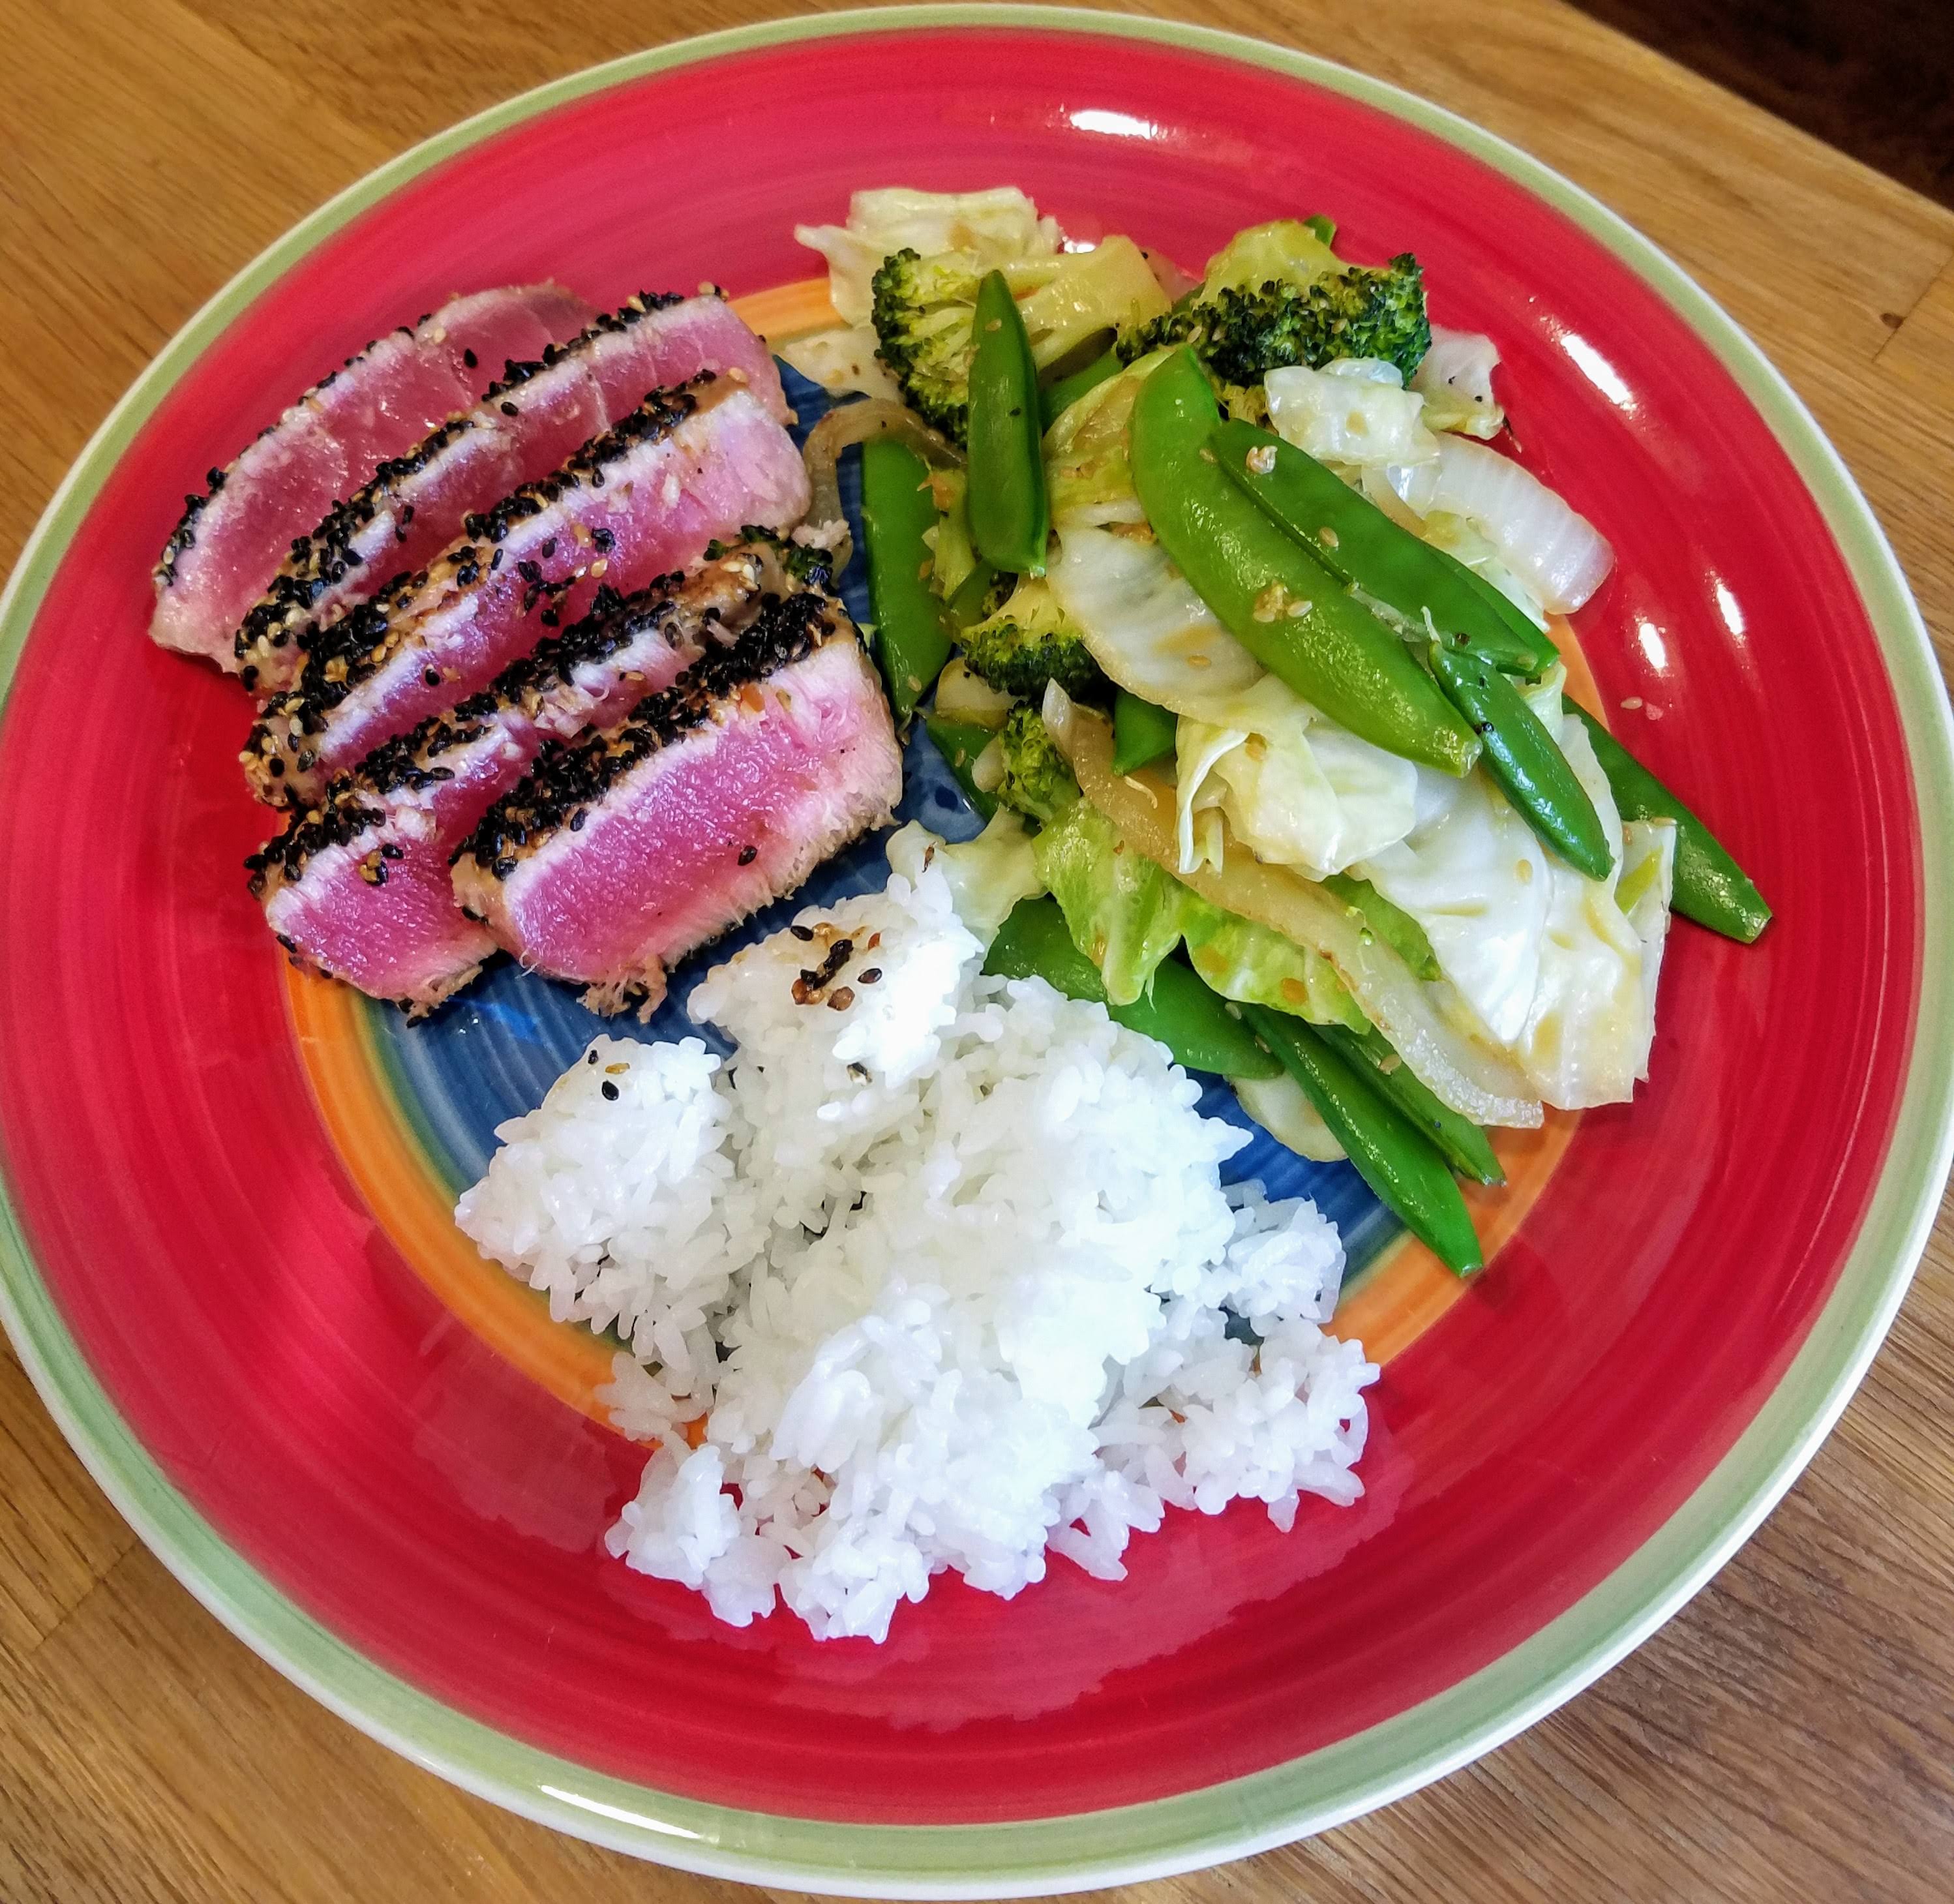 Seared Ahi Tuna with stir fried vegetables and white rice